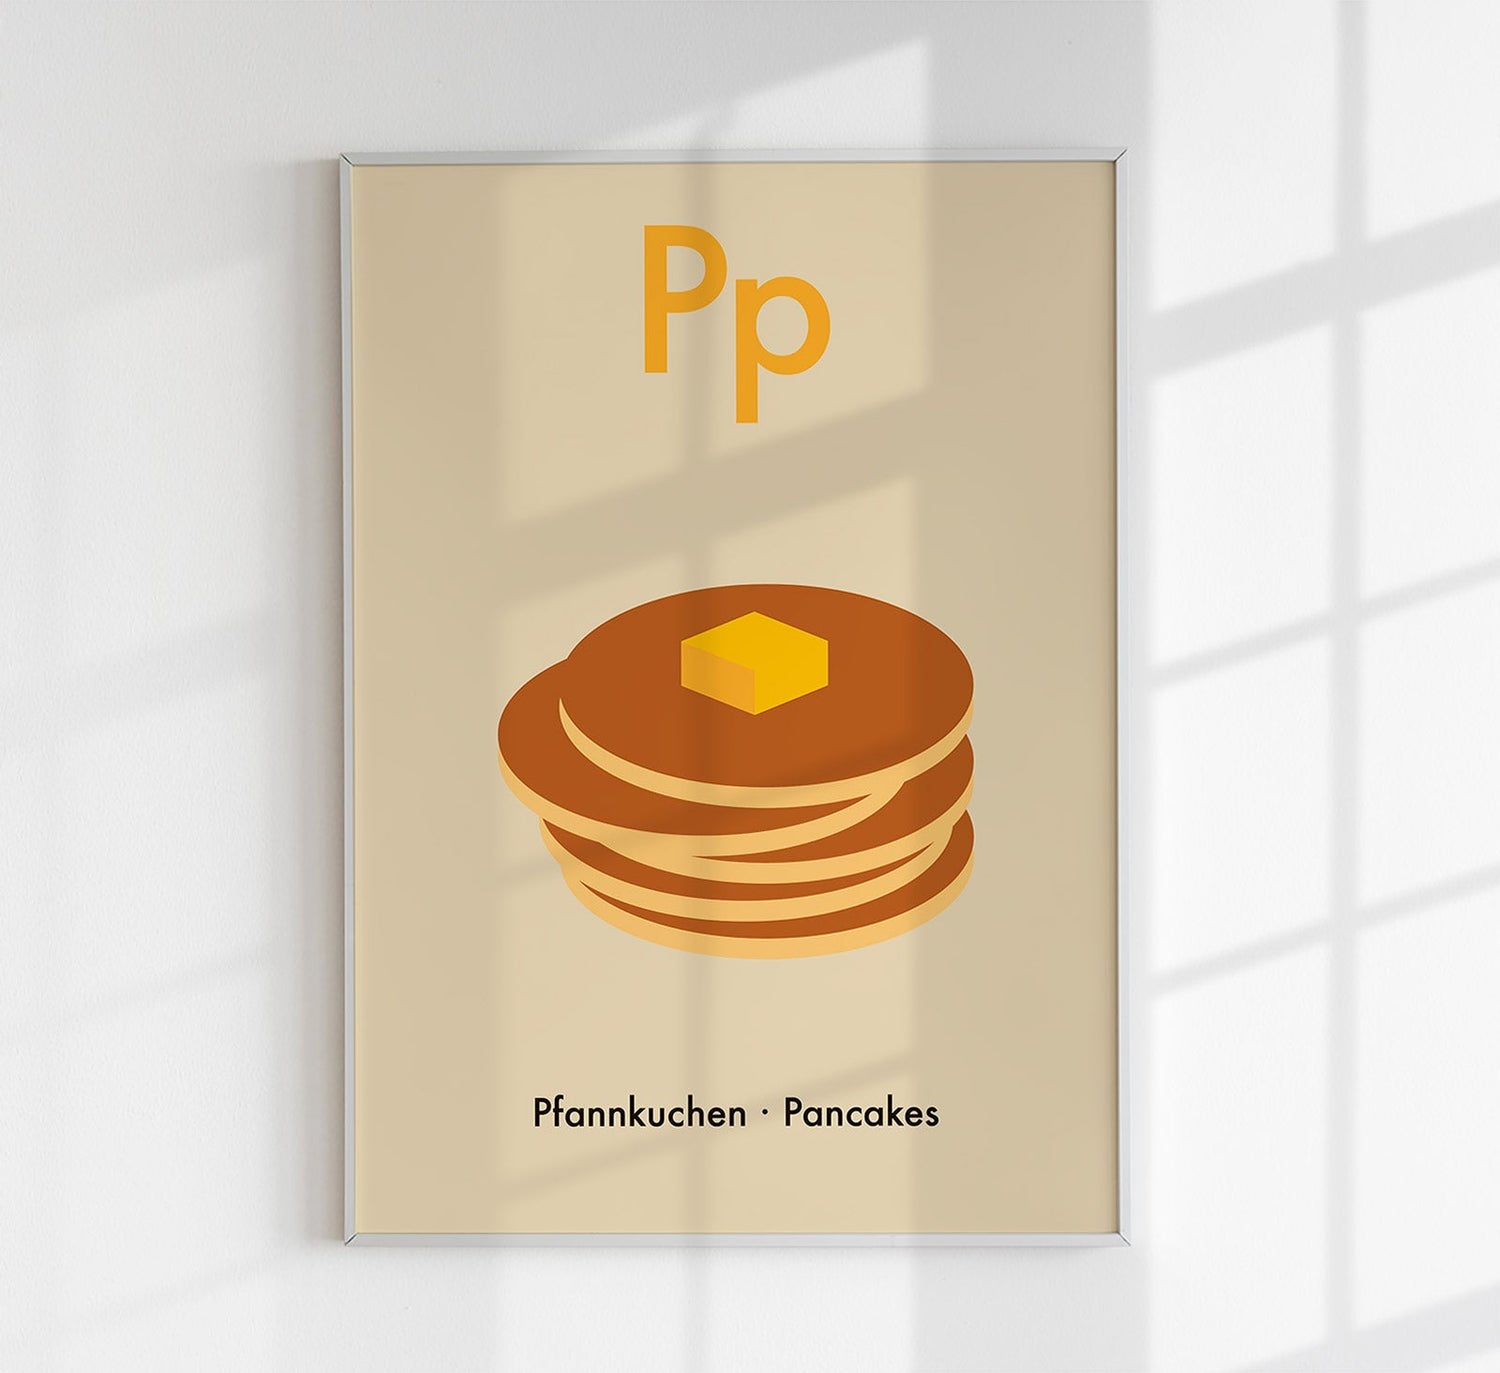 P for Pancakes - Children's Alphabet Poster in German and English